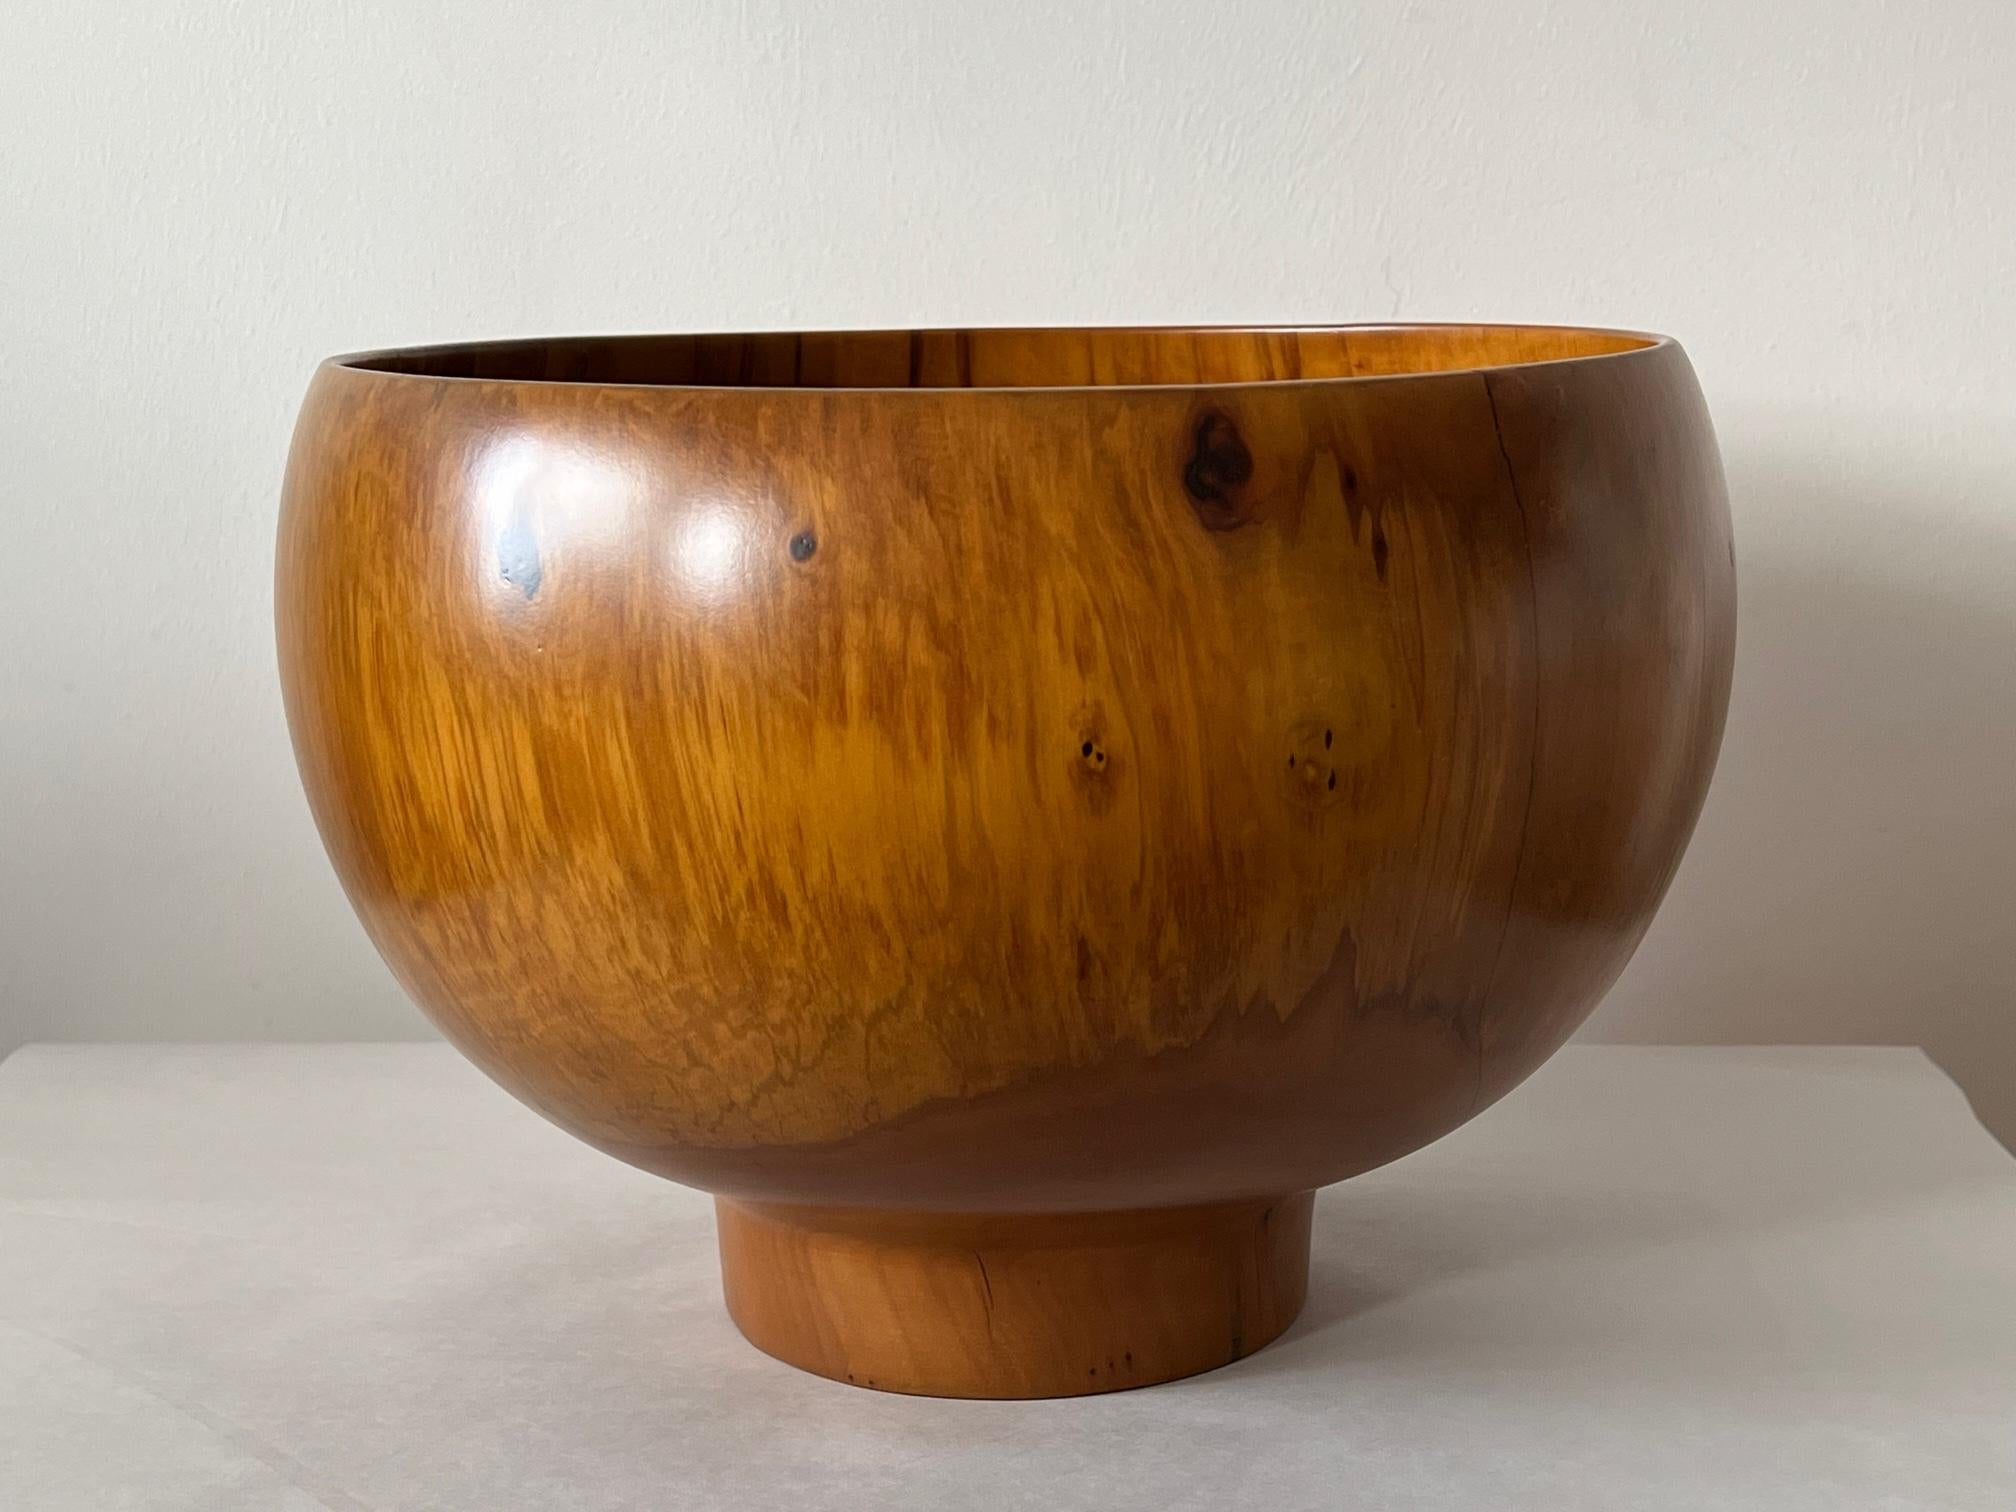 A large and impressive turned centerpiece bowl by Edward Moulthrop. Made of figured sweetgum wood and signed on the bottom.  It's big at 14